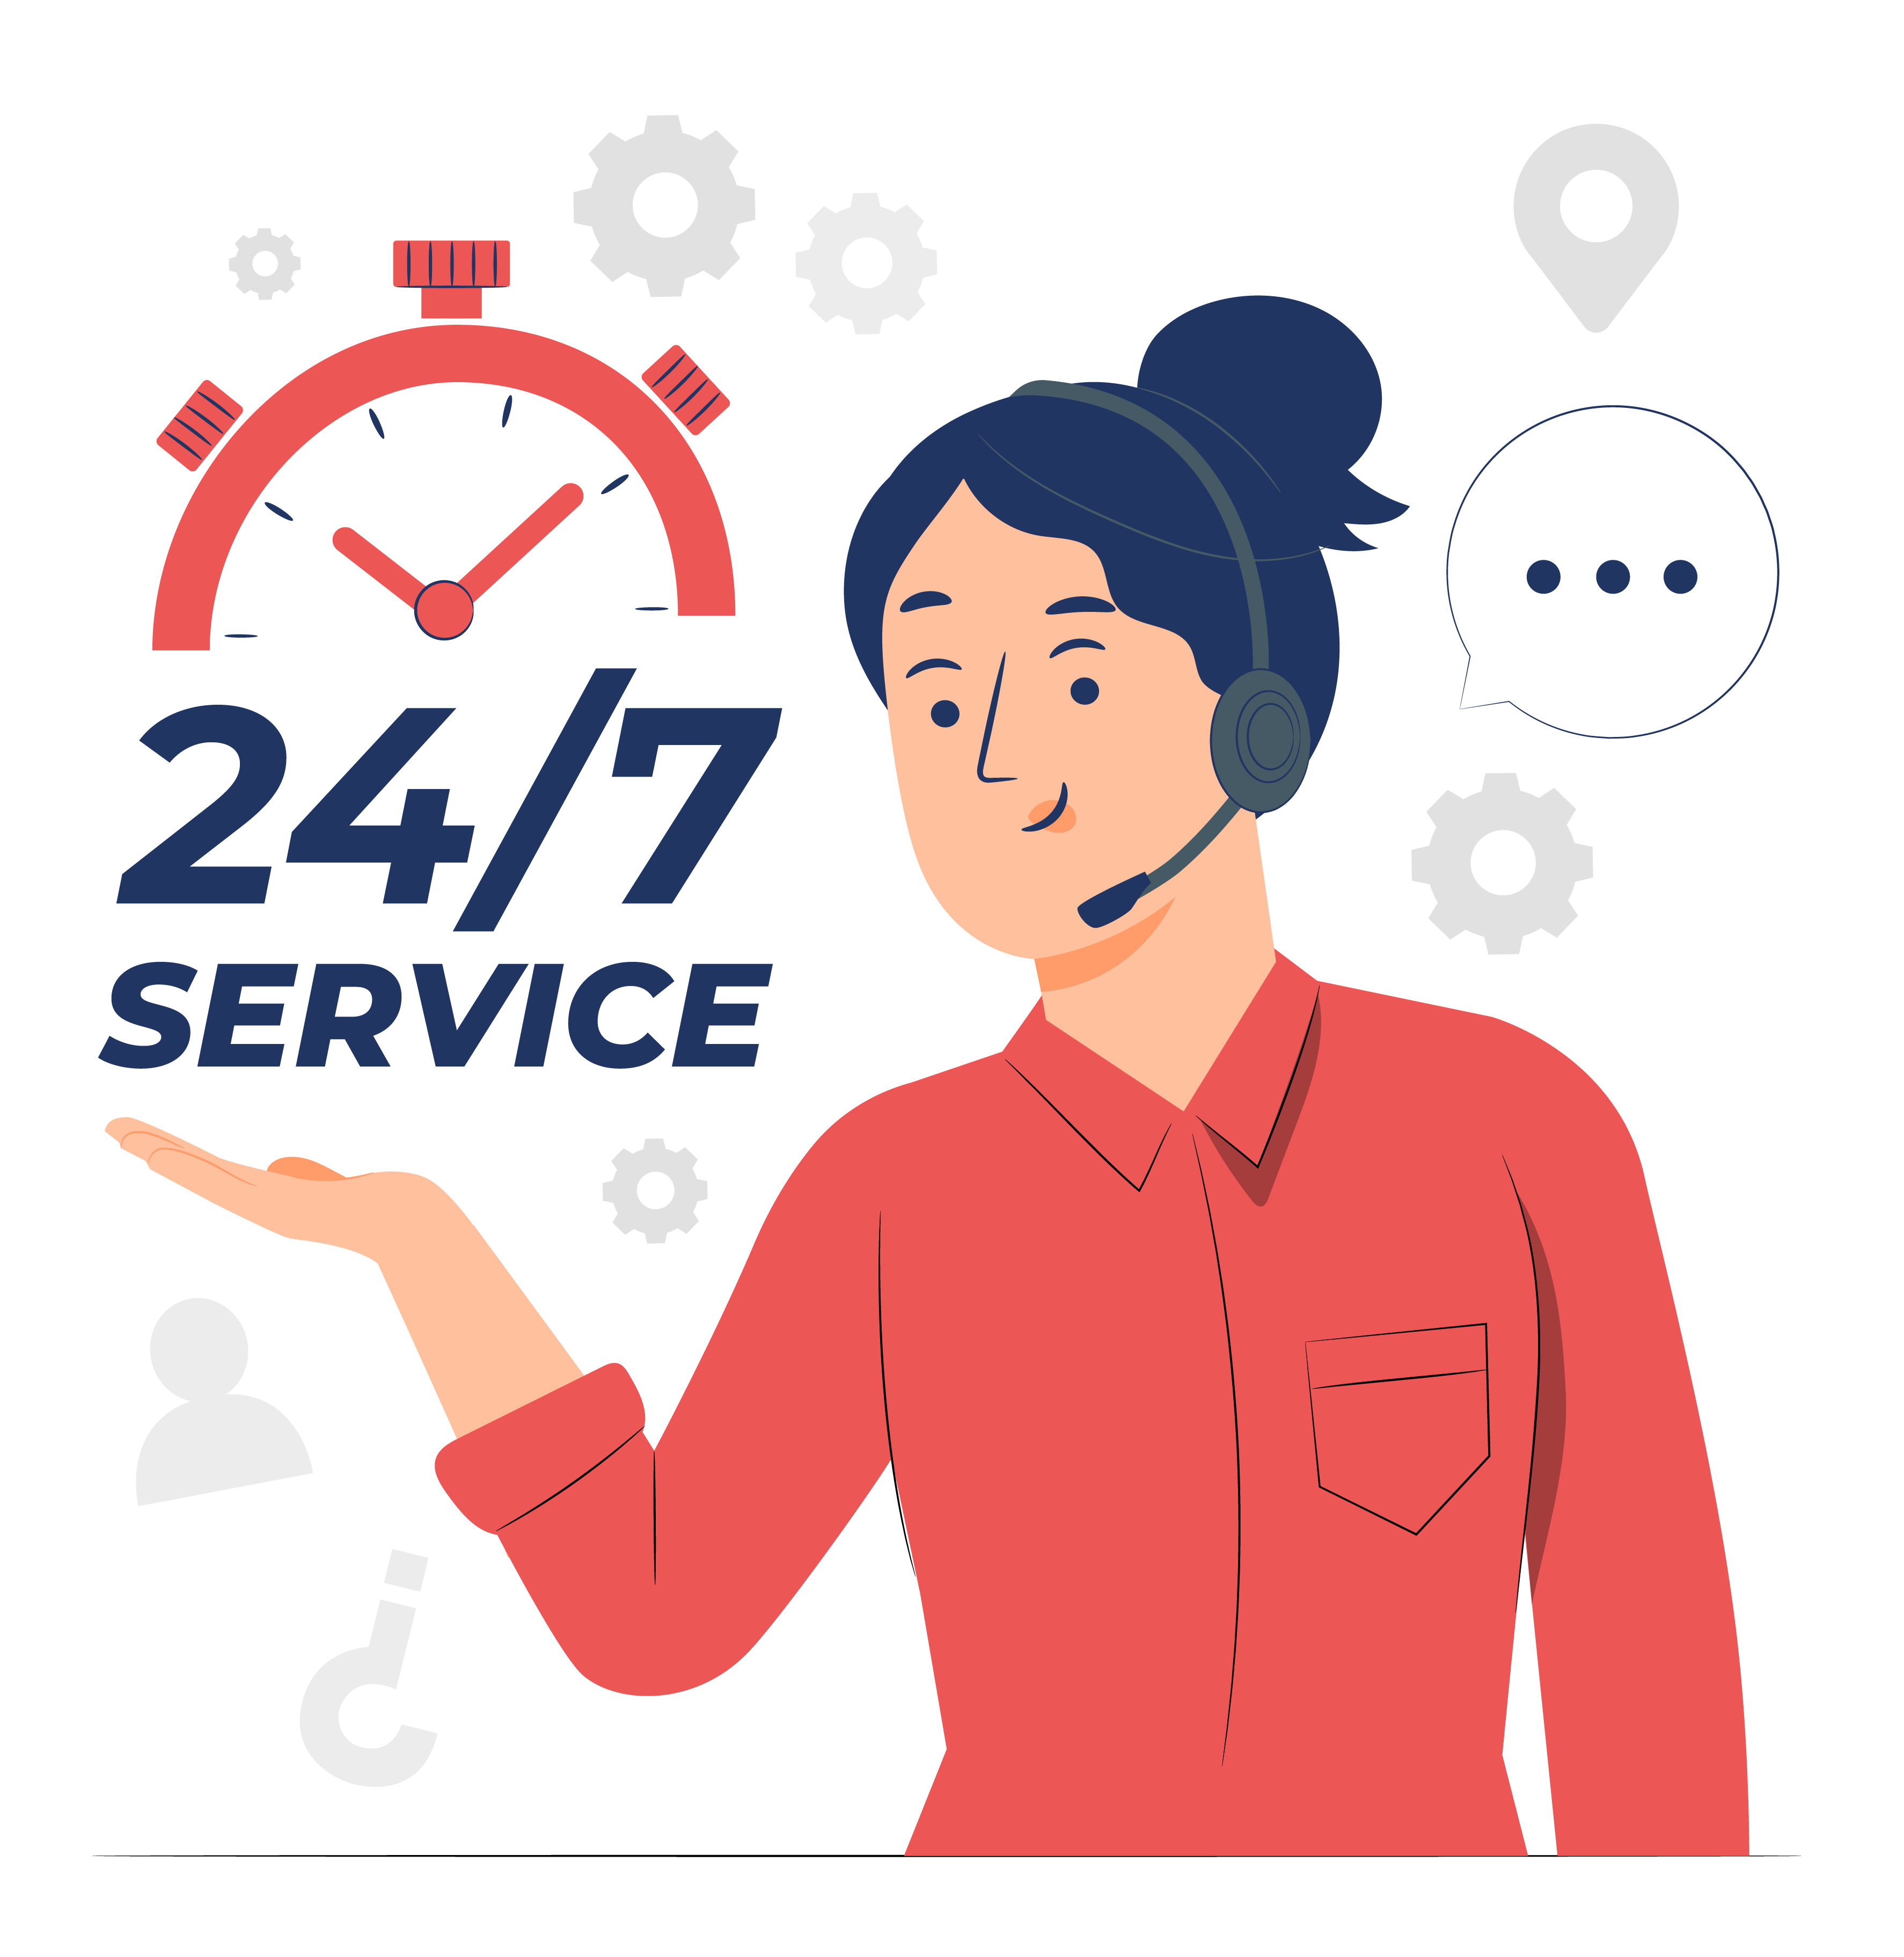 Customer Support Graphic